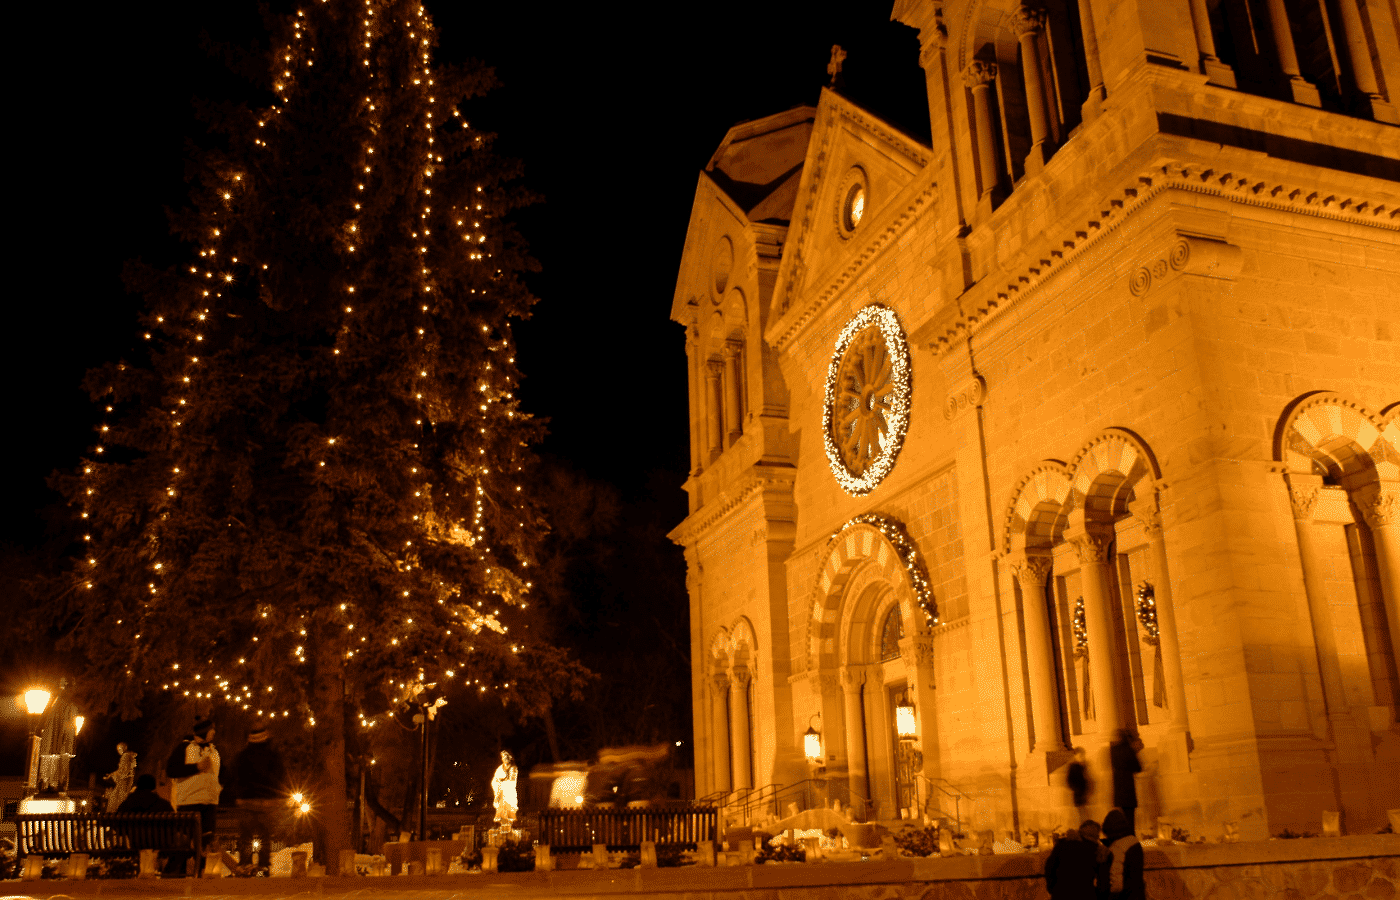 A tree lighting ceremony to celebrate the holidays in Santa Fe